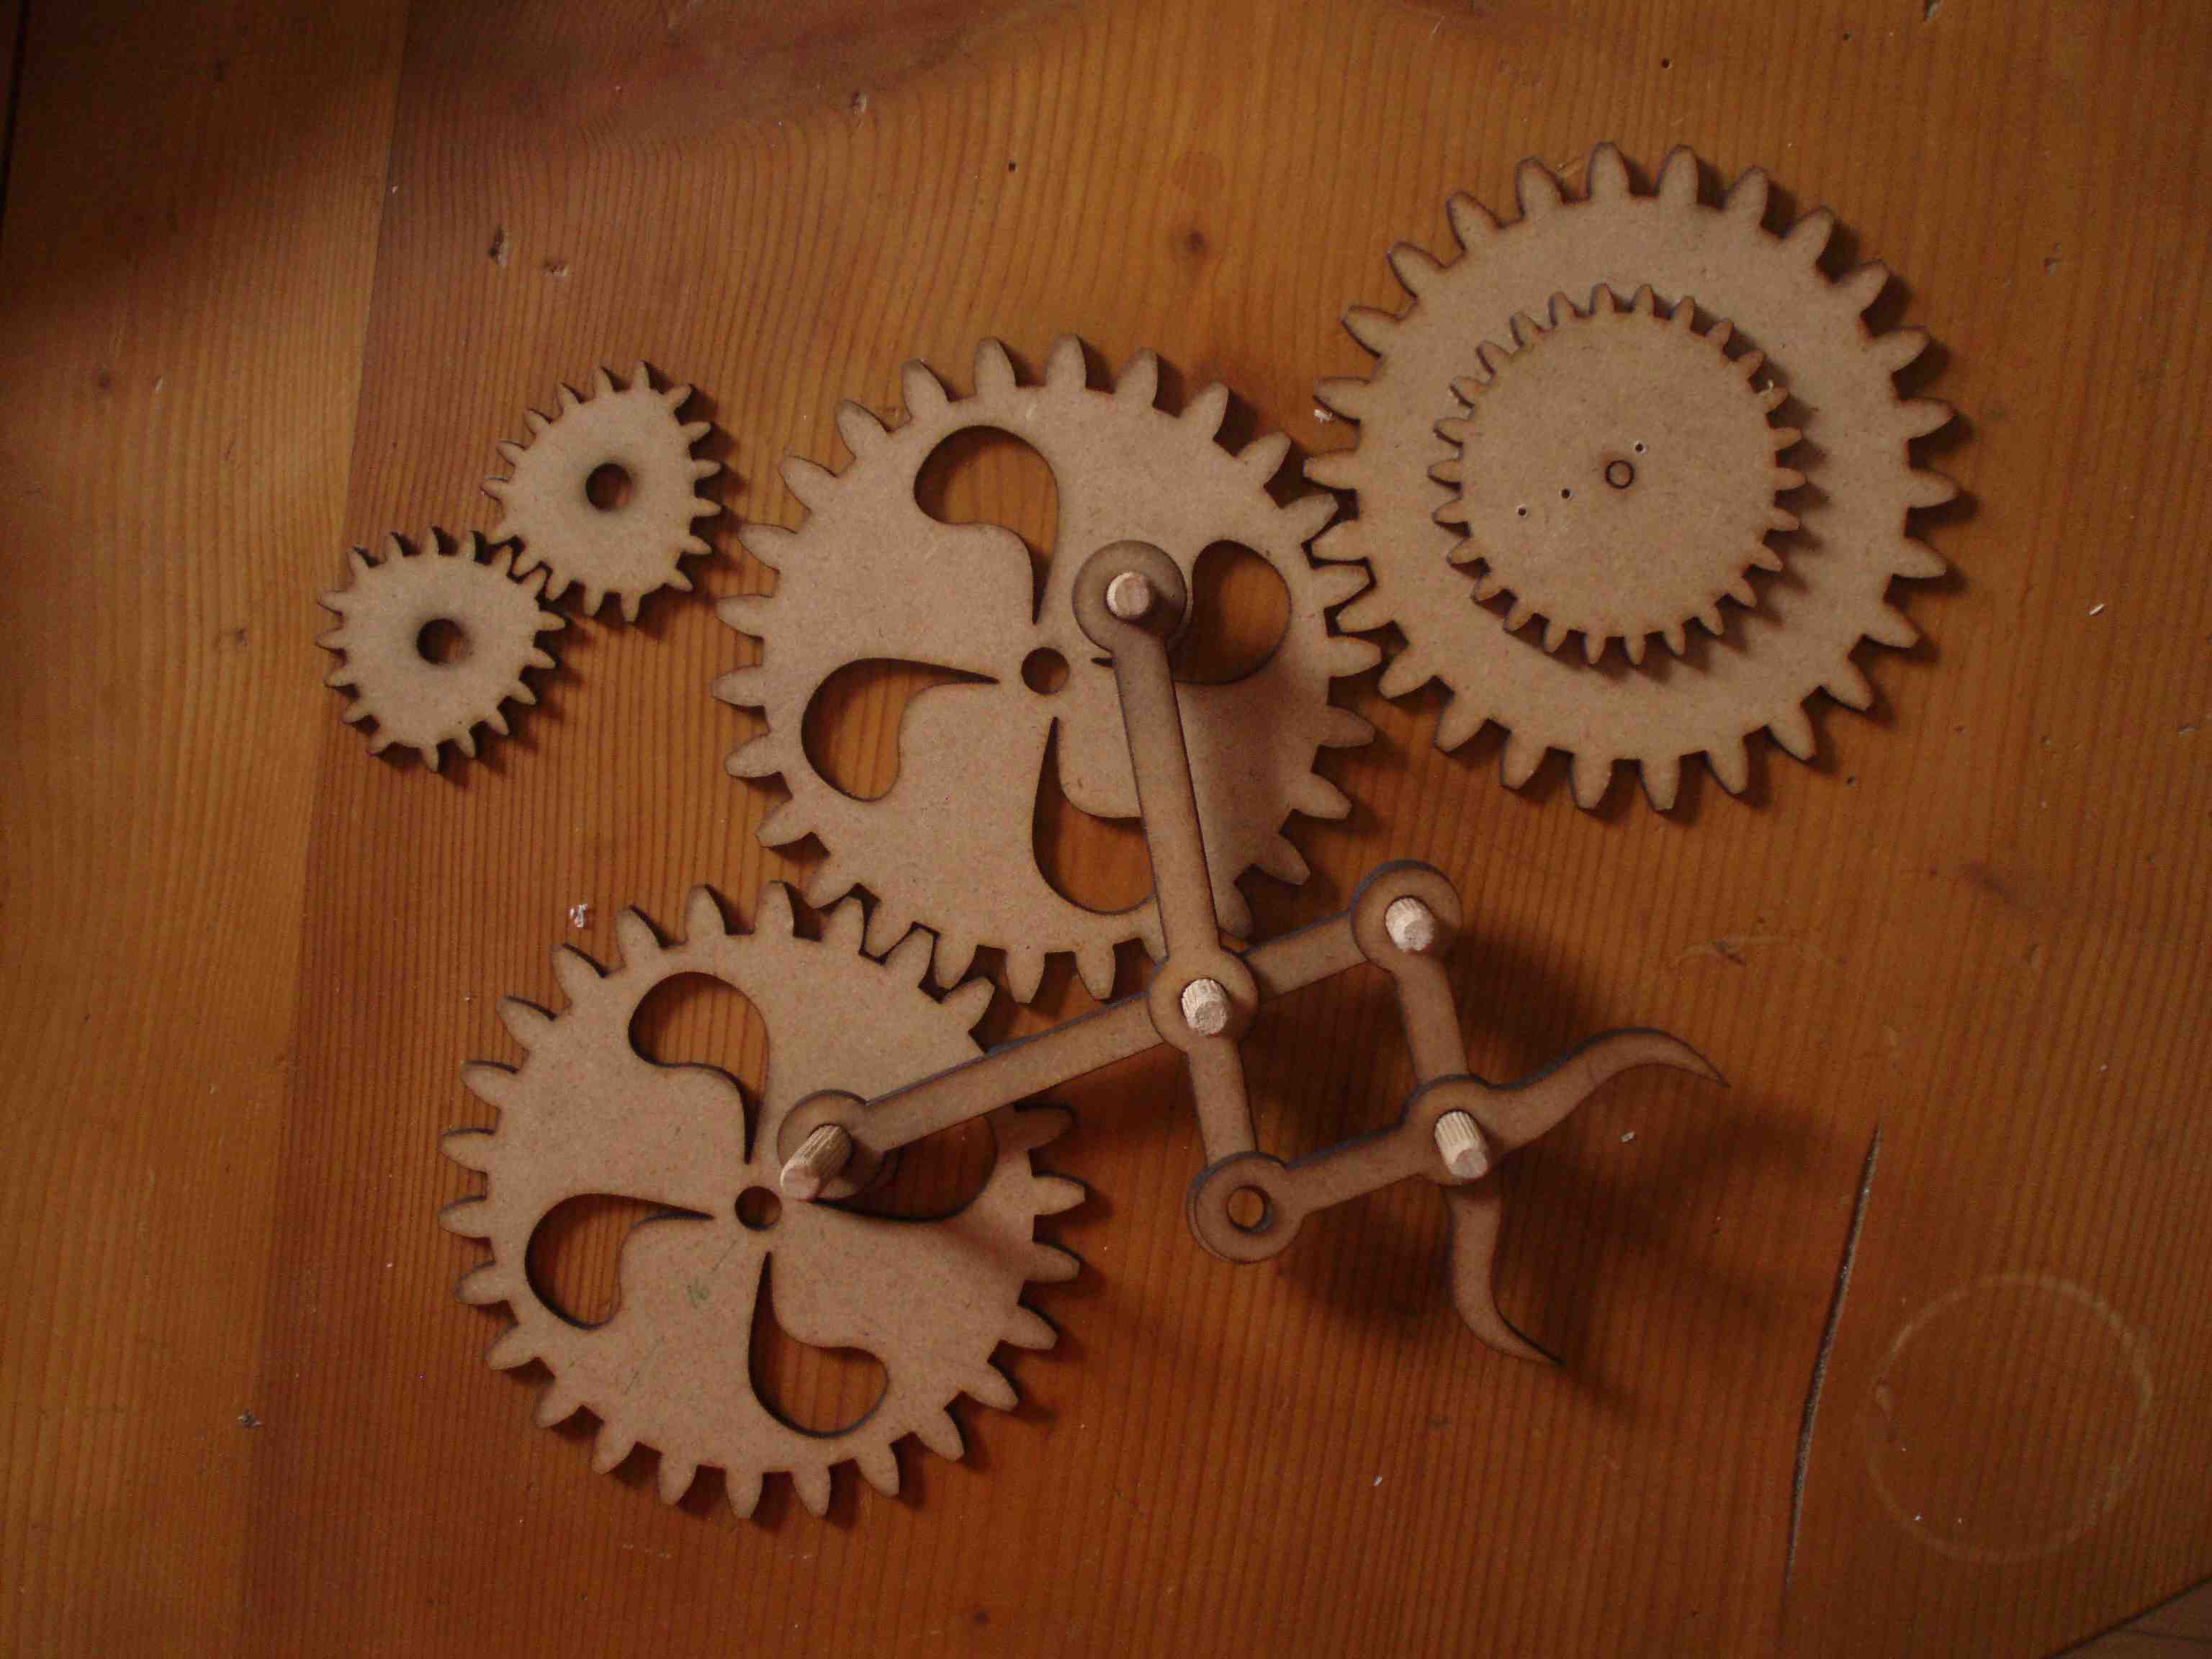 When these gears turn the attached arms open and close.